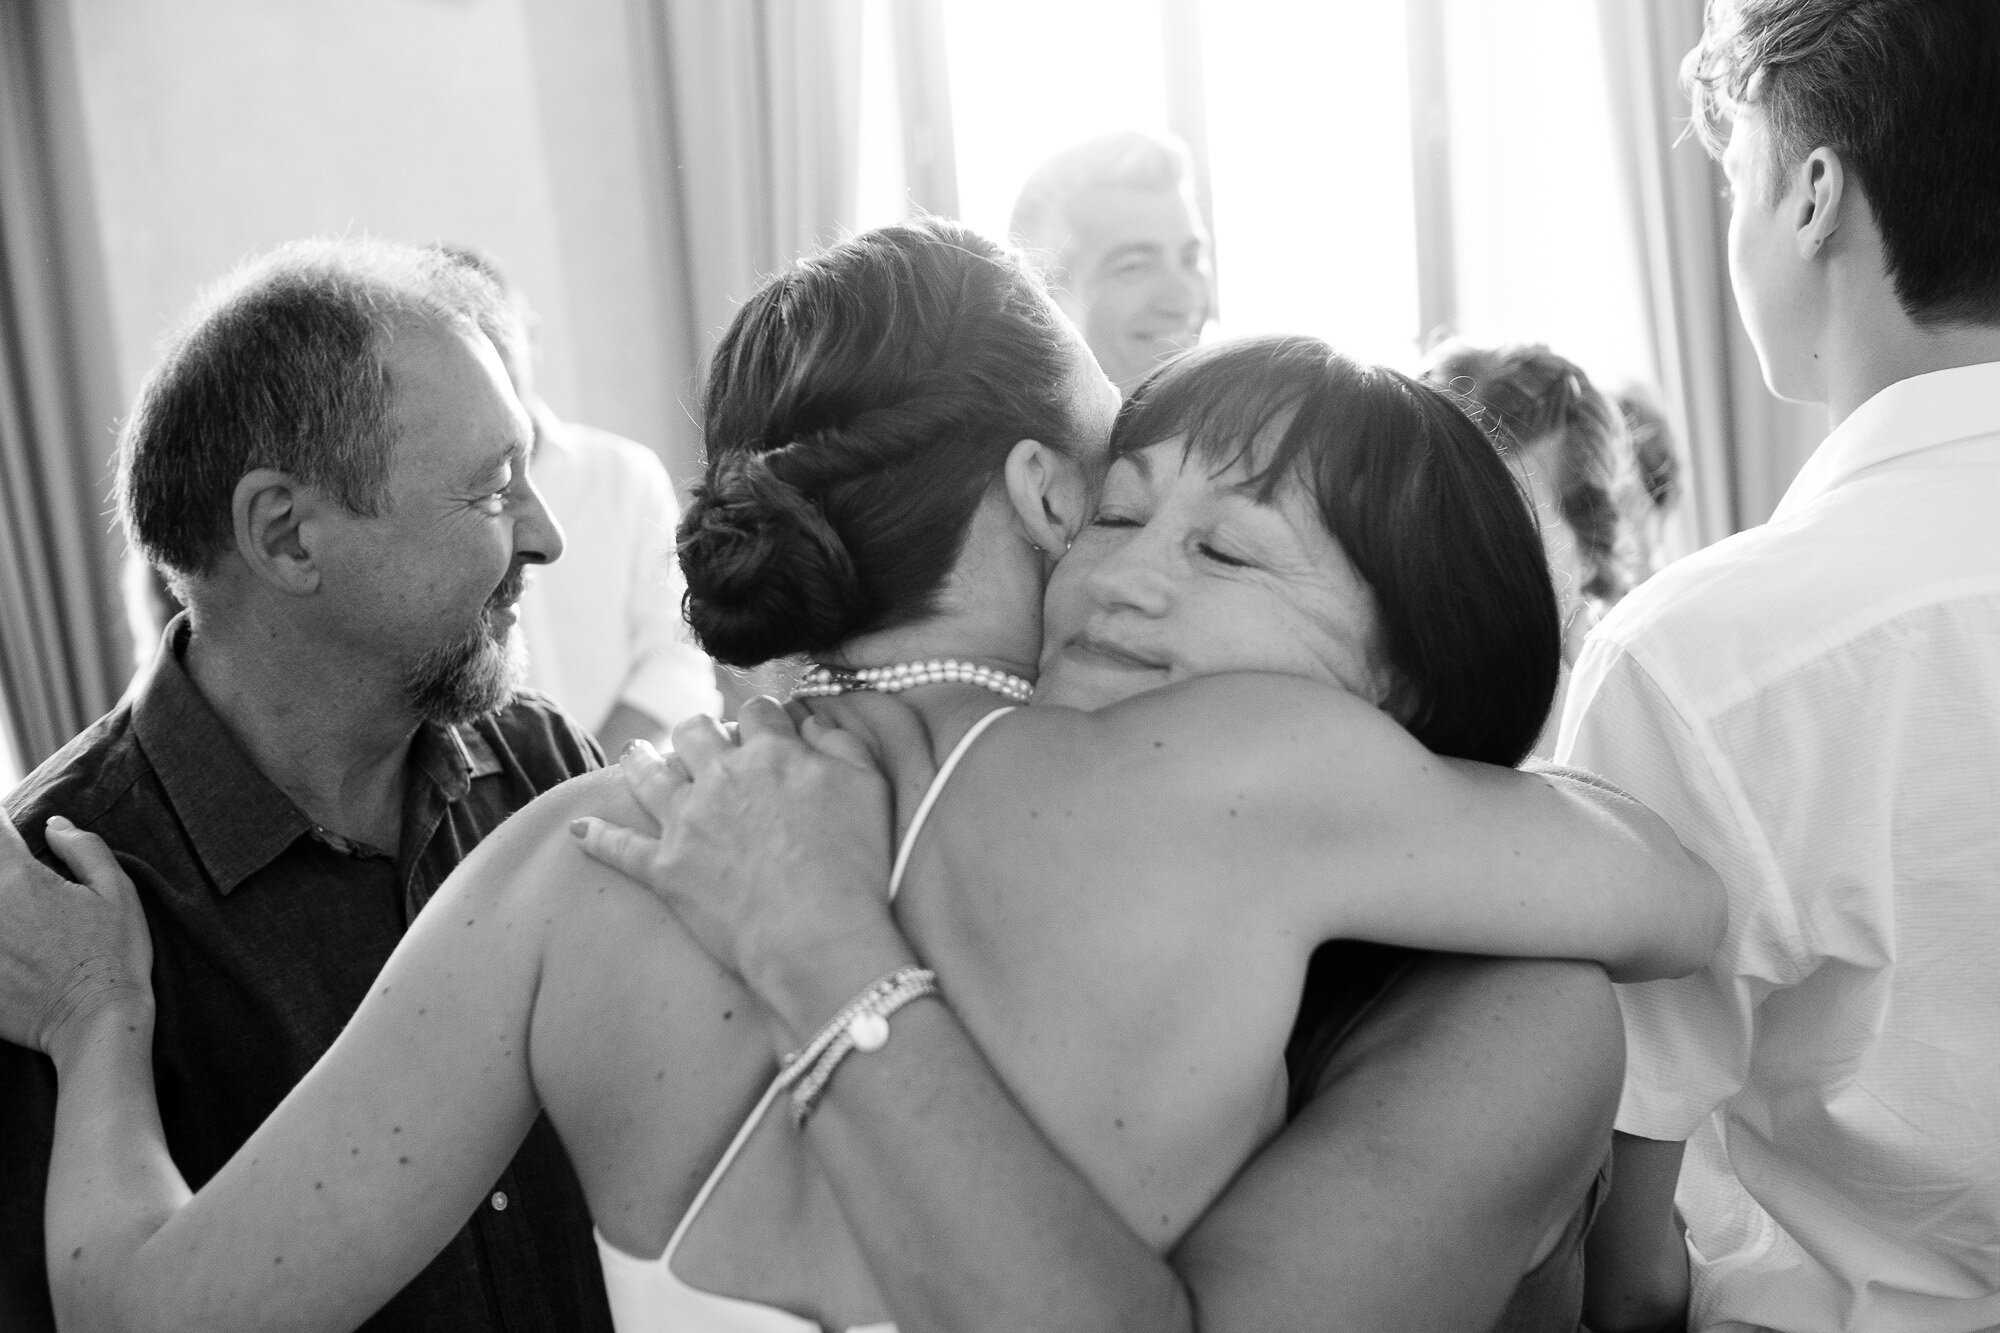  Elena gives her mom a hug after the civil ceremony at Pontassieve’s city hall during their destination wedding in Tuscany, Italy by wedding photographer Scott Williams (www.scottwilliamsphotographer.com) 